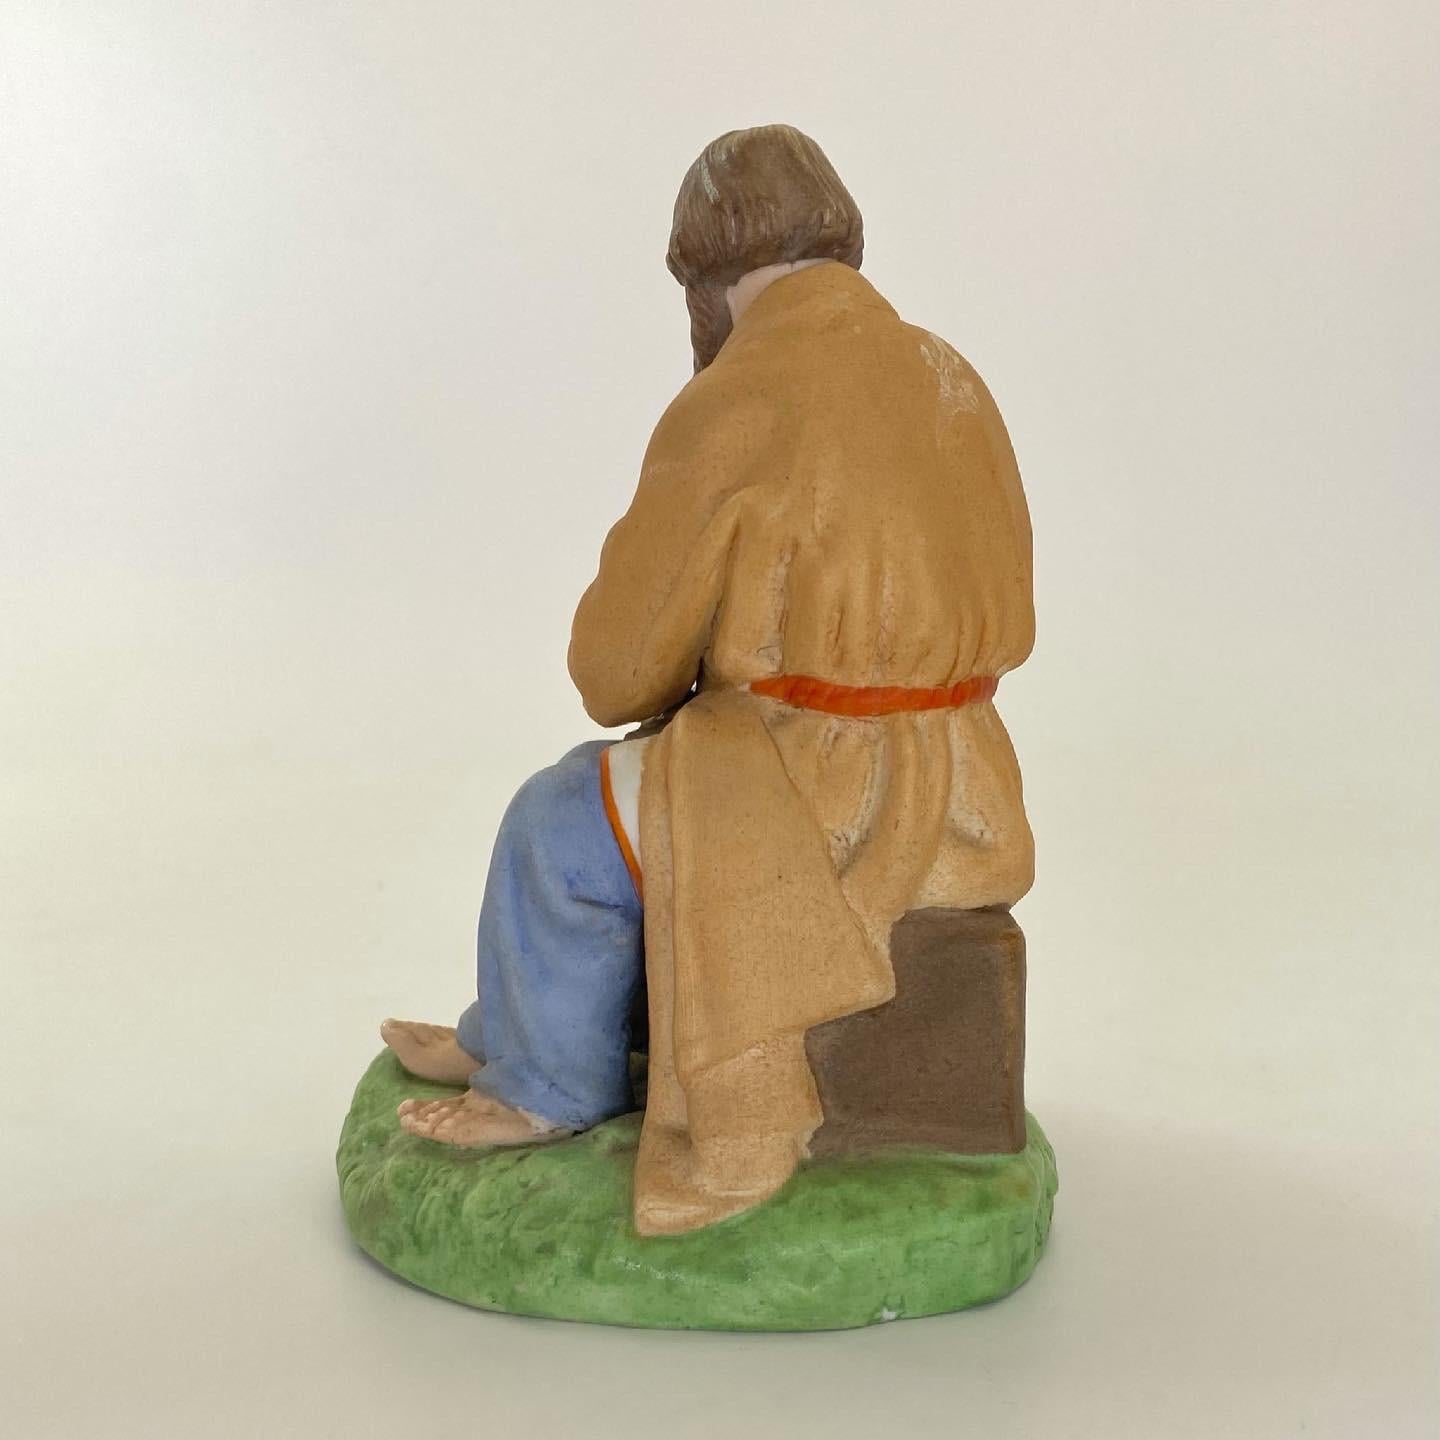 Russian biscuit porcelain figure, Gardner Factory, Moscow, c. 1880. Modelled as a seated peasant, preparing his lunch, by salting his bread. Having a tall hat, and his boots by his side, upon a circular grassy mound.
Printed and impressed factory